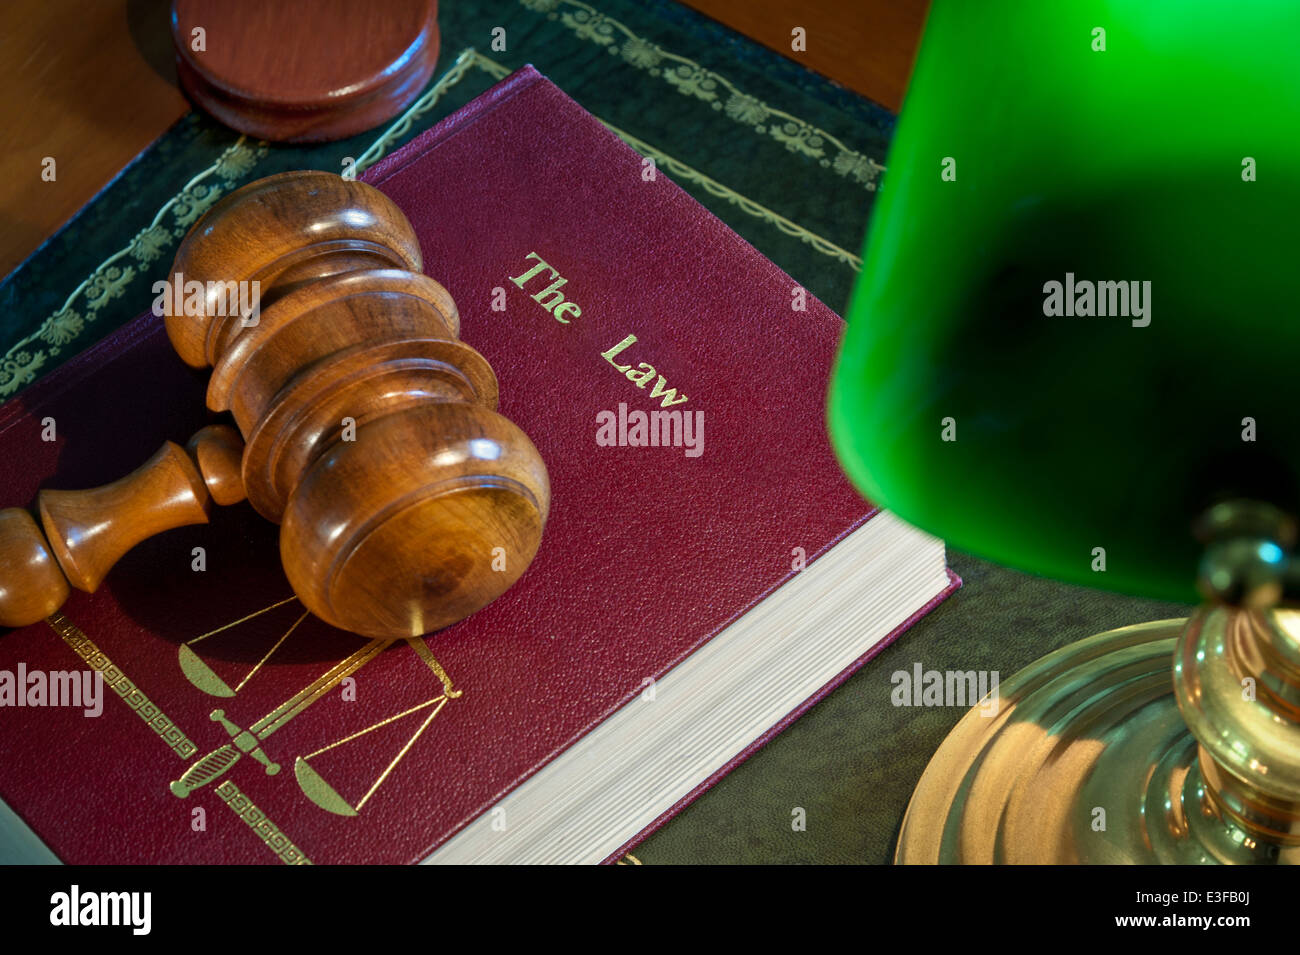 LAW COURTS SENTENCE Judges wooden gavel on 'The Law' book with scales of justice emblem illuminated by old desk lamp on leather bound bench desk Stock Photo